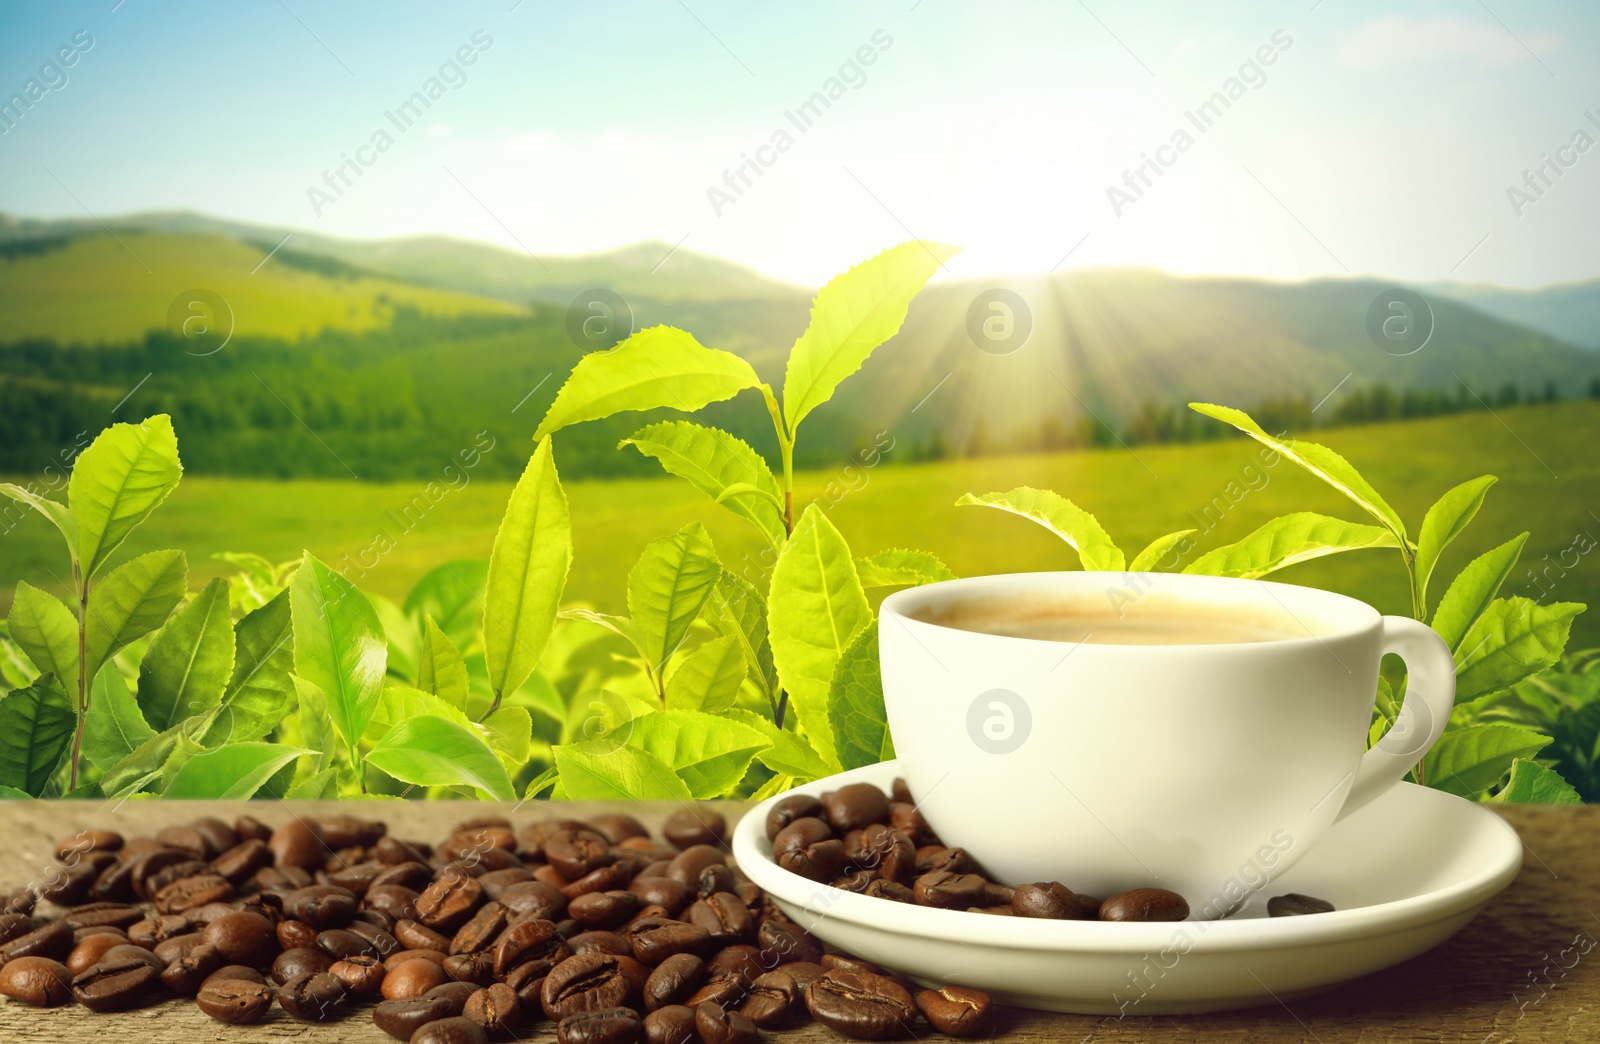 Image of Cup of aromatic hot coffee on wooden table and beautiful view of mountain landscape